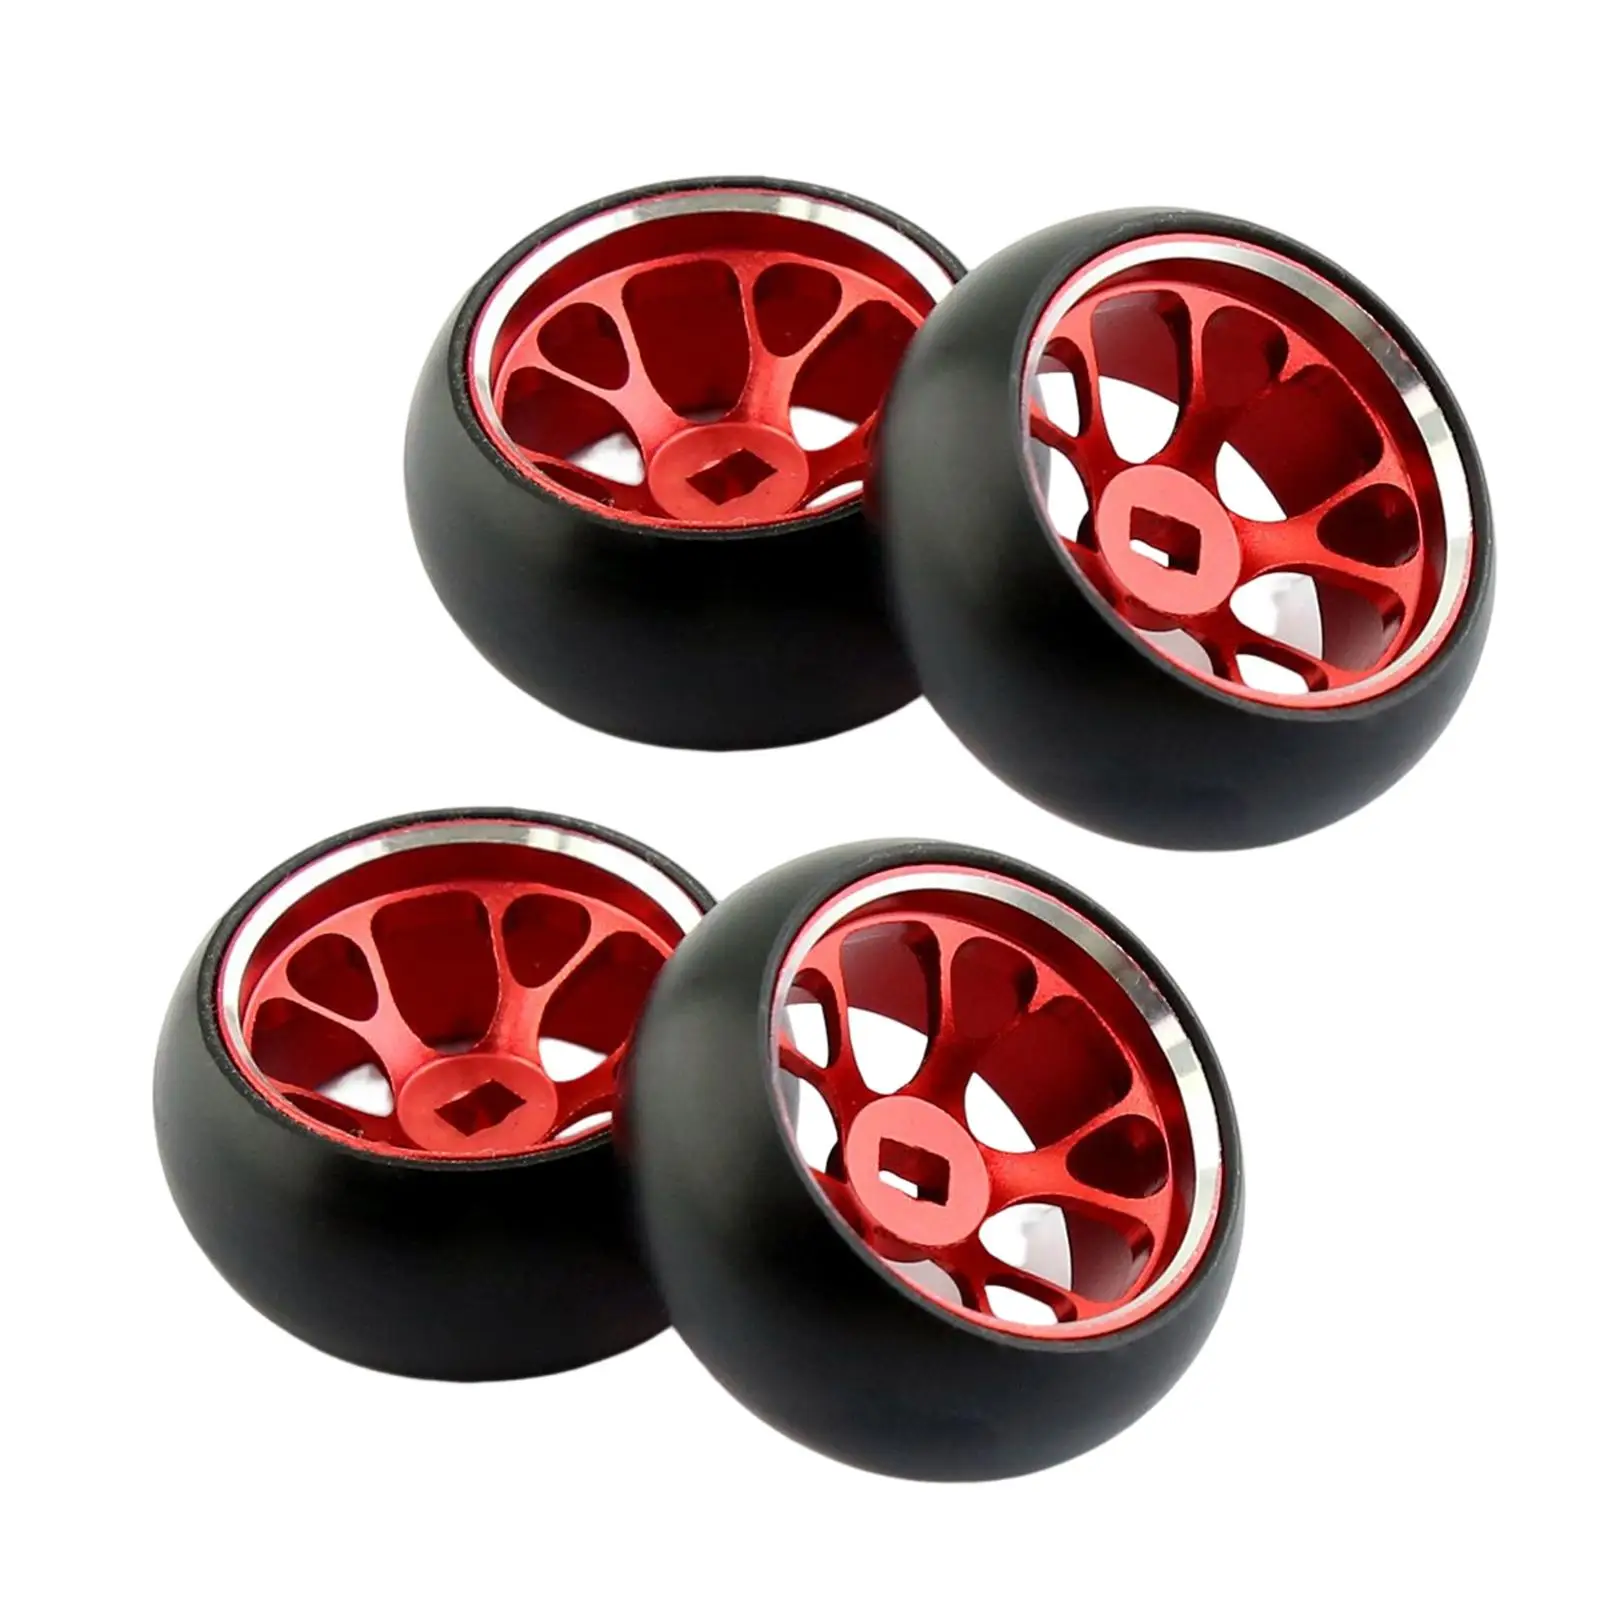 4x 1:28 Scale RC Car Wheel Tires Replacement Upgrade Parts Spare Parts for K989 K969 284131 RC Model Accessories